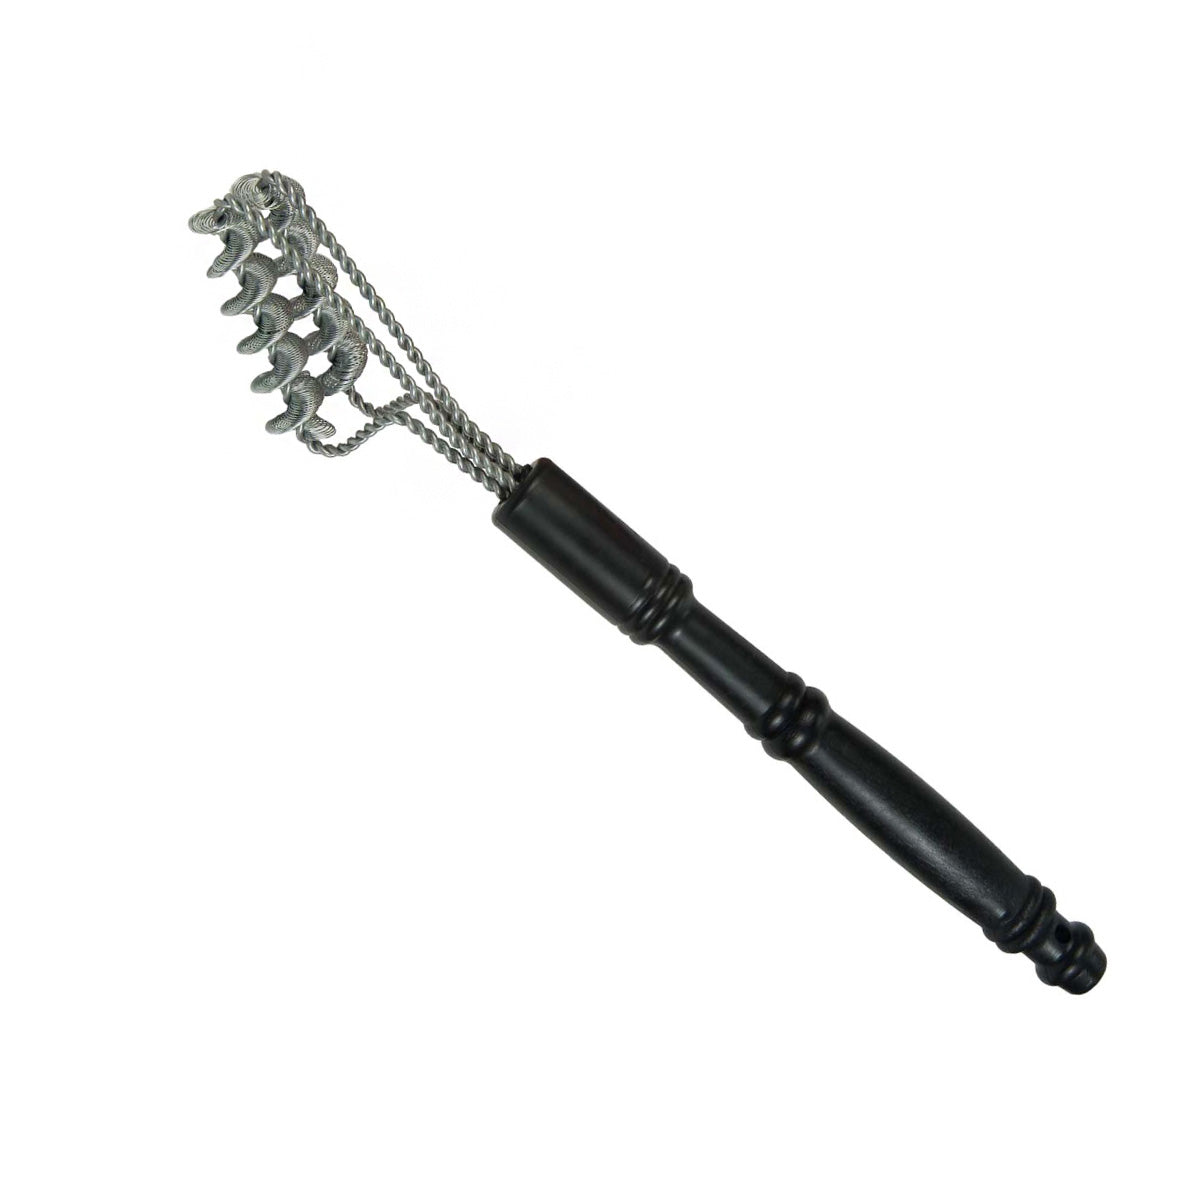 GrillGrate Grate Valley Grill Brush